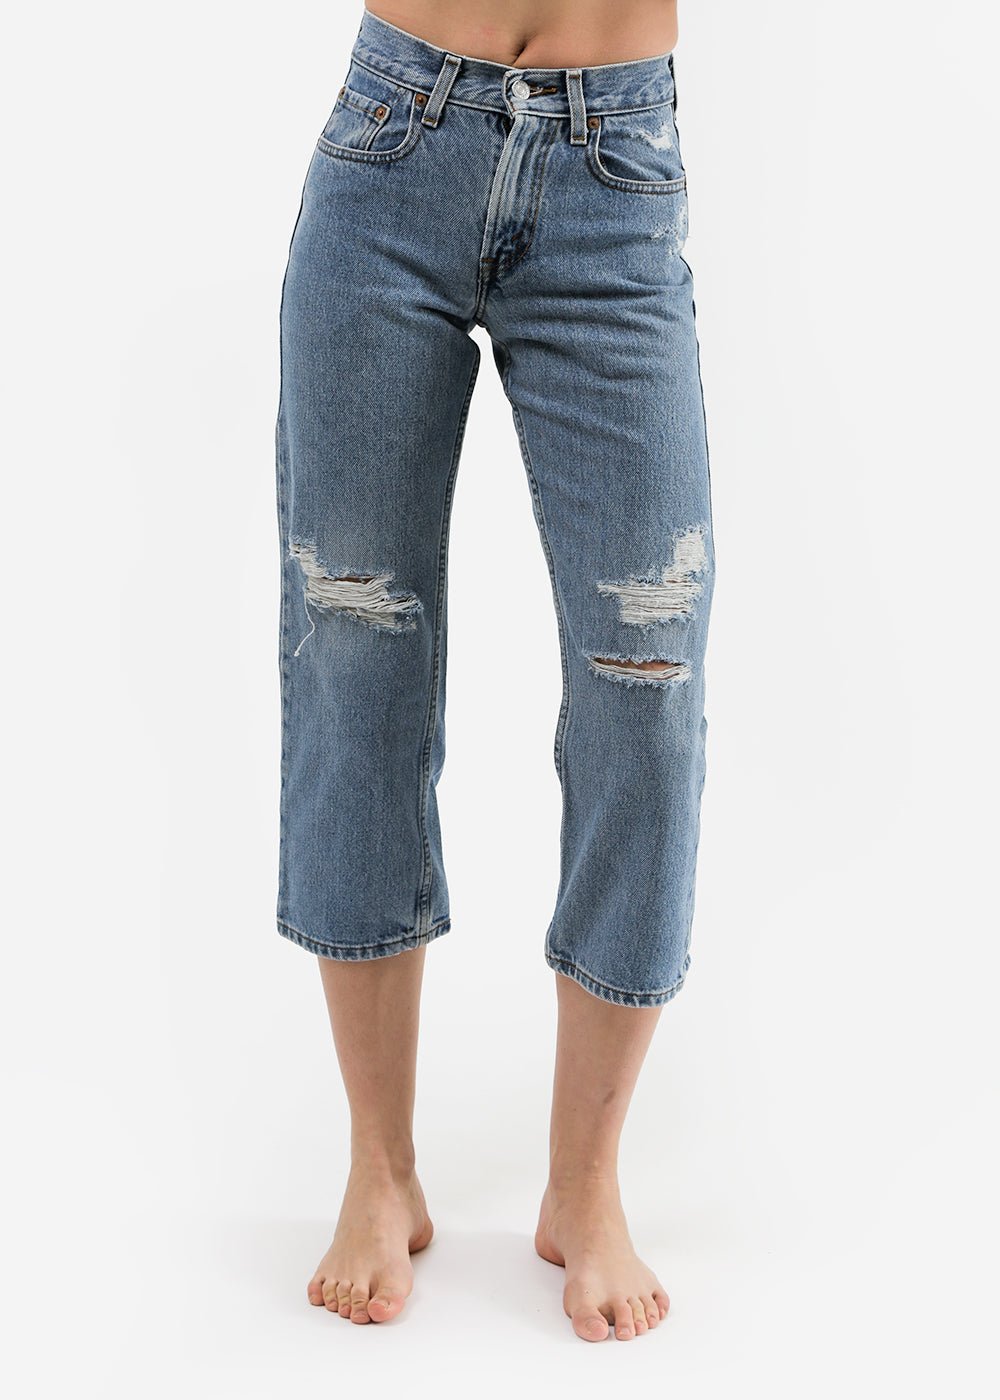 High Waist Jeans with Pockets  Retro outfits, Outfits, Straight leg jeans